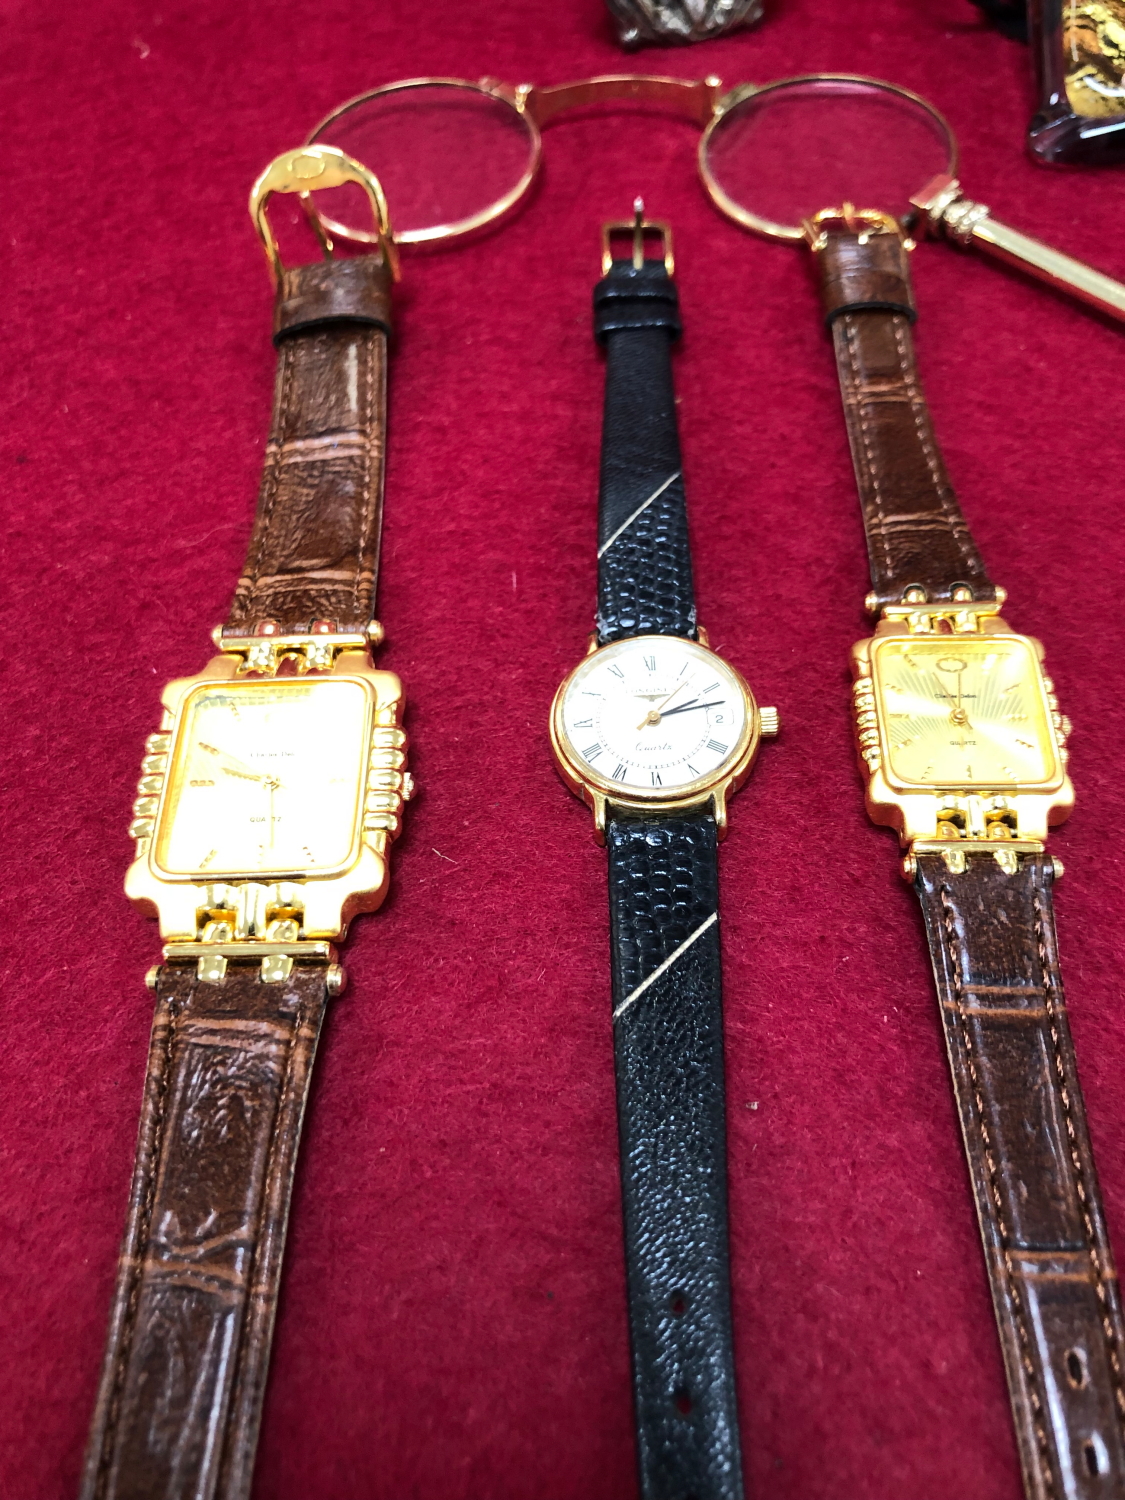 A LADIES LONGINES WRIST WATCH, AN OMNIA FOB WATCH AND A PAIR OF LADIES AND GENTS CHARLES DELON DRESS - Image 2 of 4